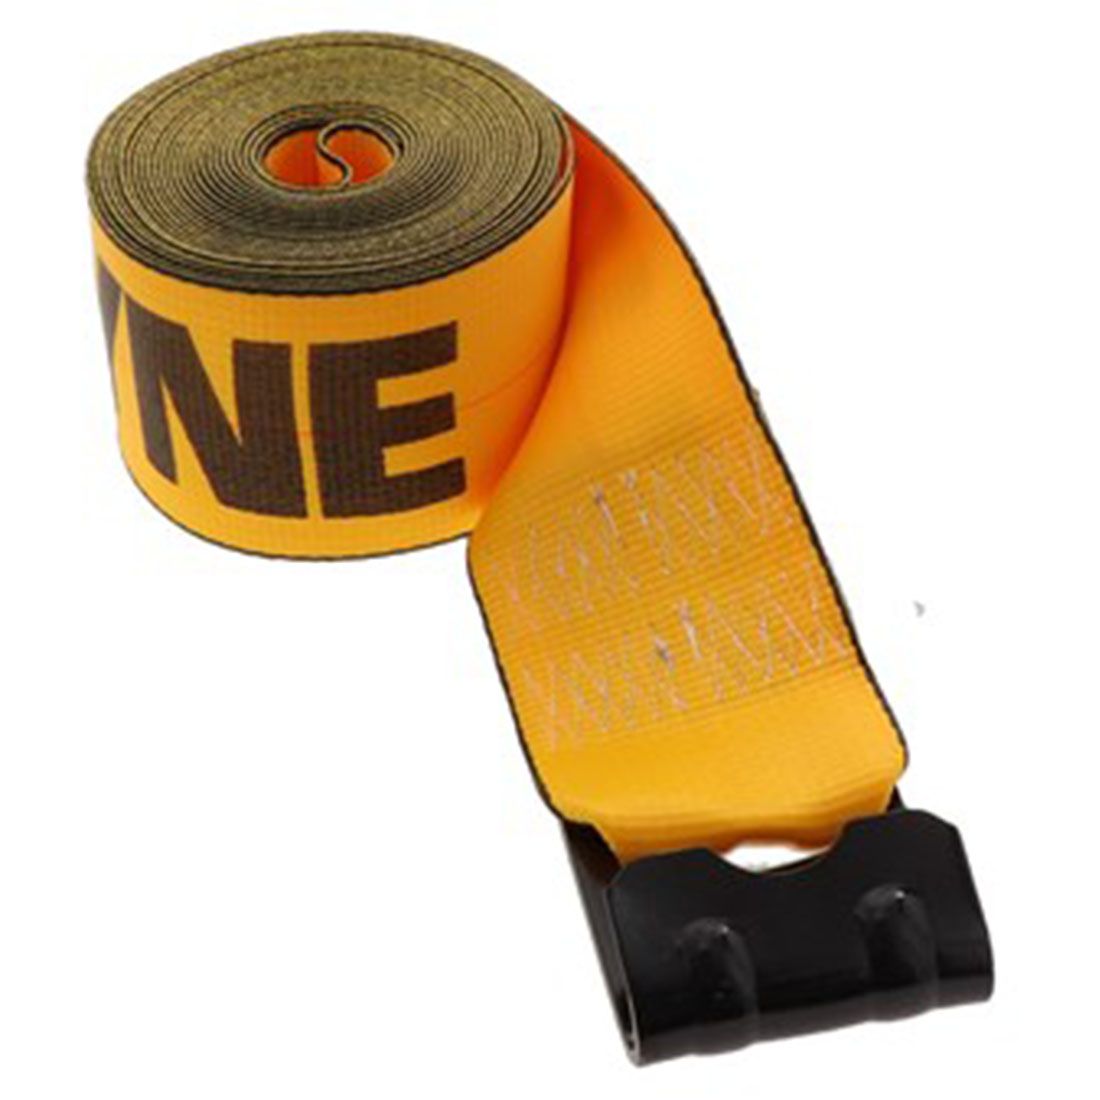 425021Y 4 x 50 Ft Yellow Winch Strap with Flat Hook PN 